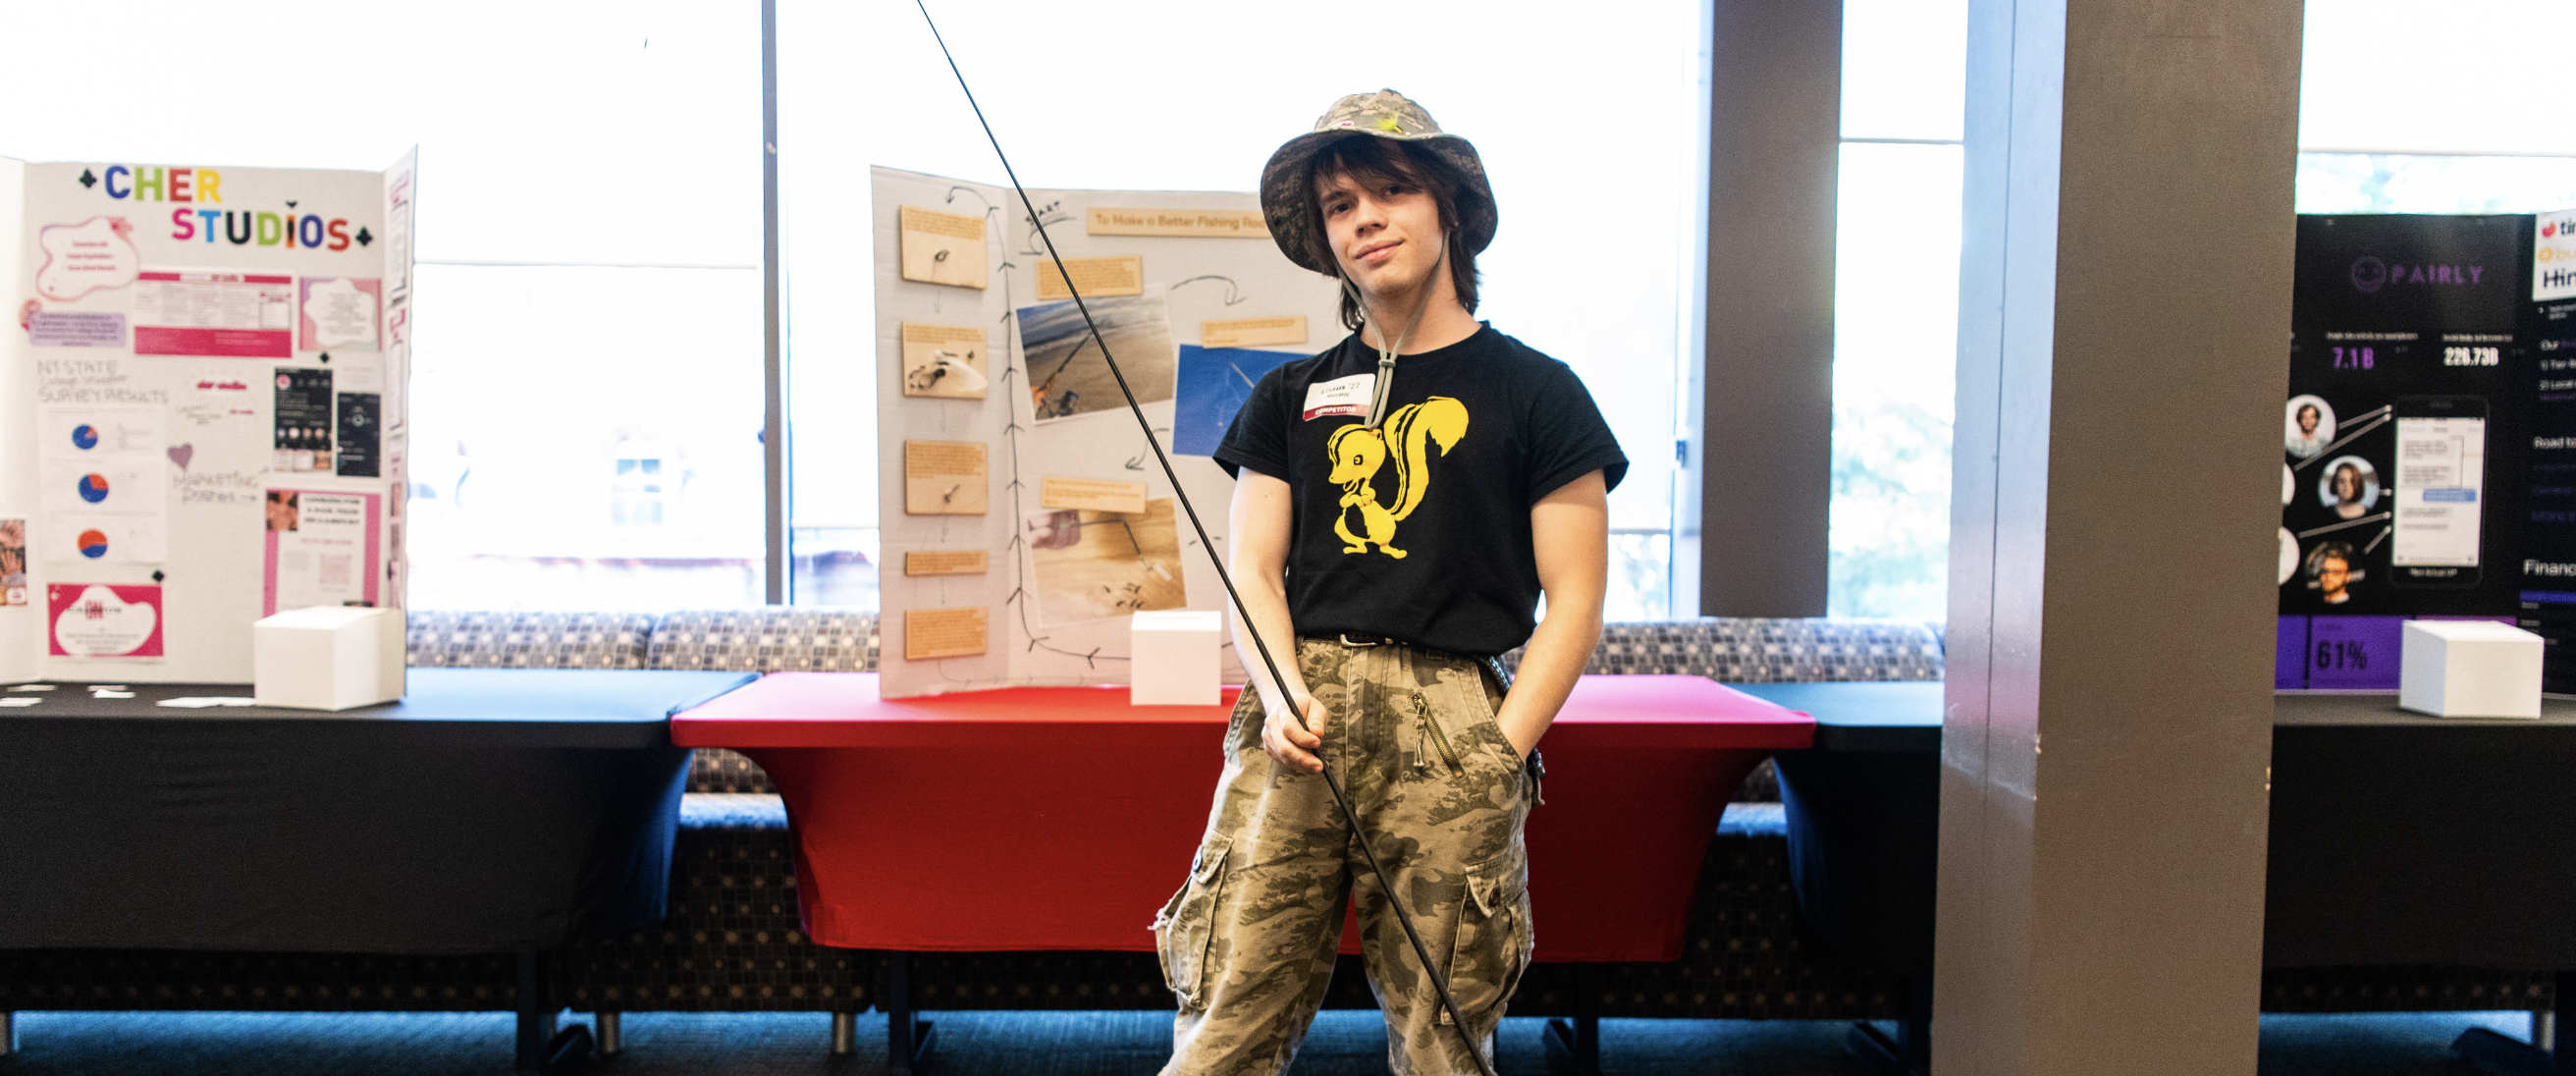 A person with long brown hair stands in front of a wall of large windows. The person is wearing a brimmed hat, camouflage pants, and a black T-shirt with a yellow cartoon drawing of a skunk on it. The person is holding a long fishing pole.